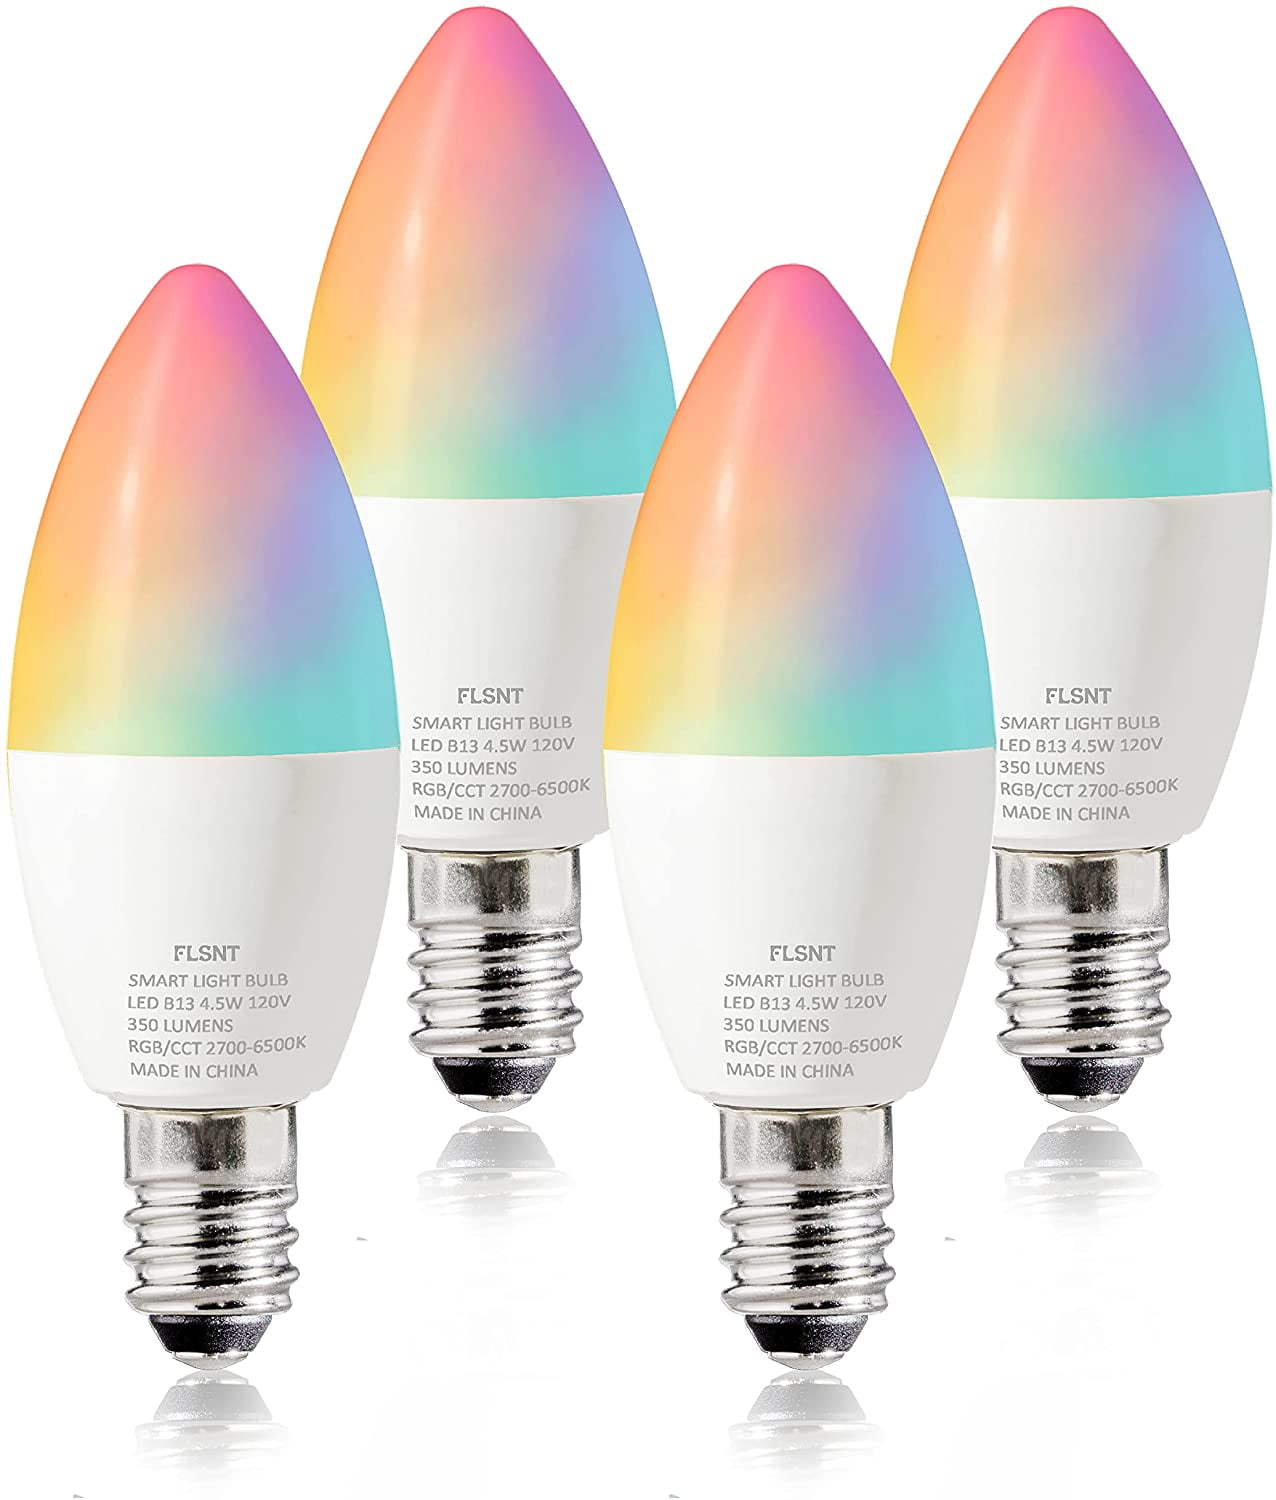 WiFi RGB Smart LED Light Bulb Color Changing for Alexa Google Home Assistant 